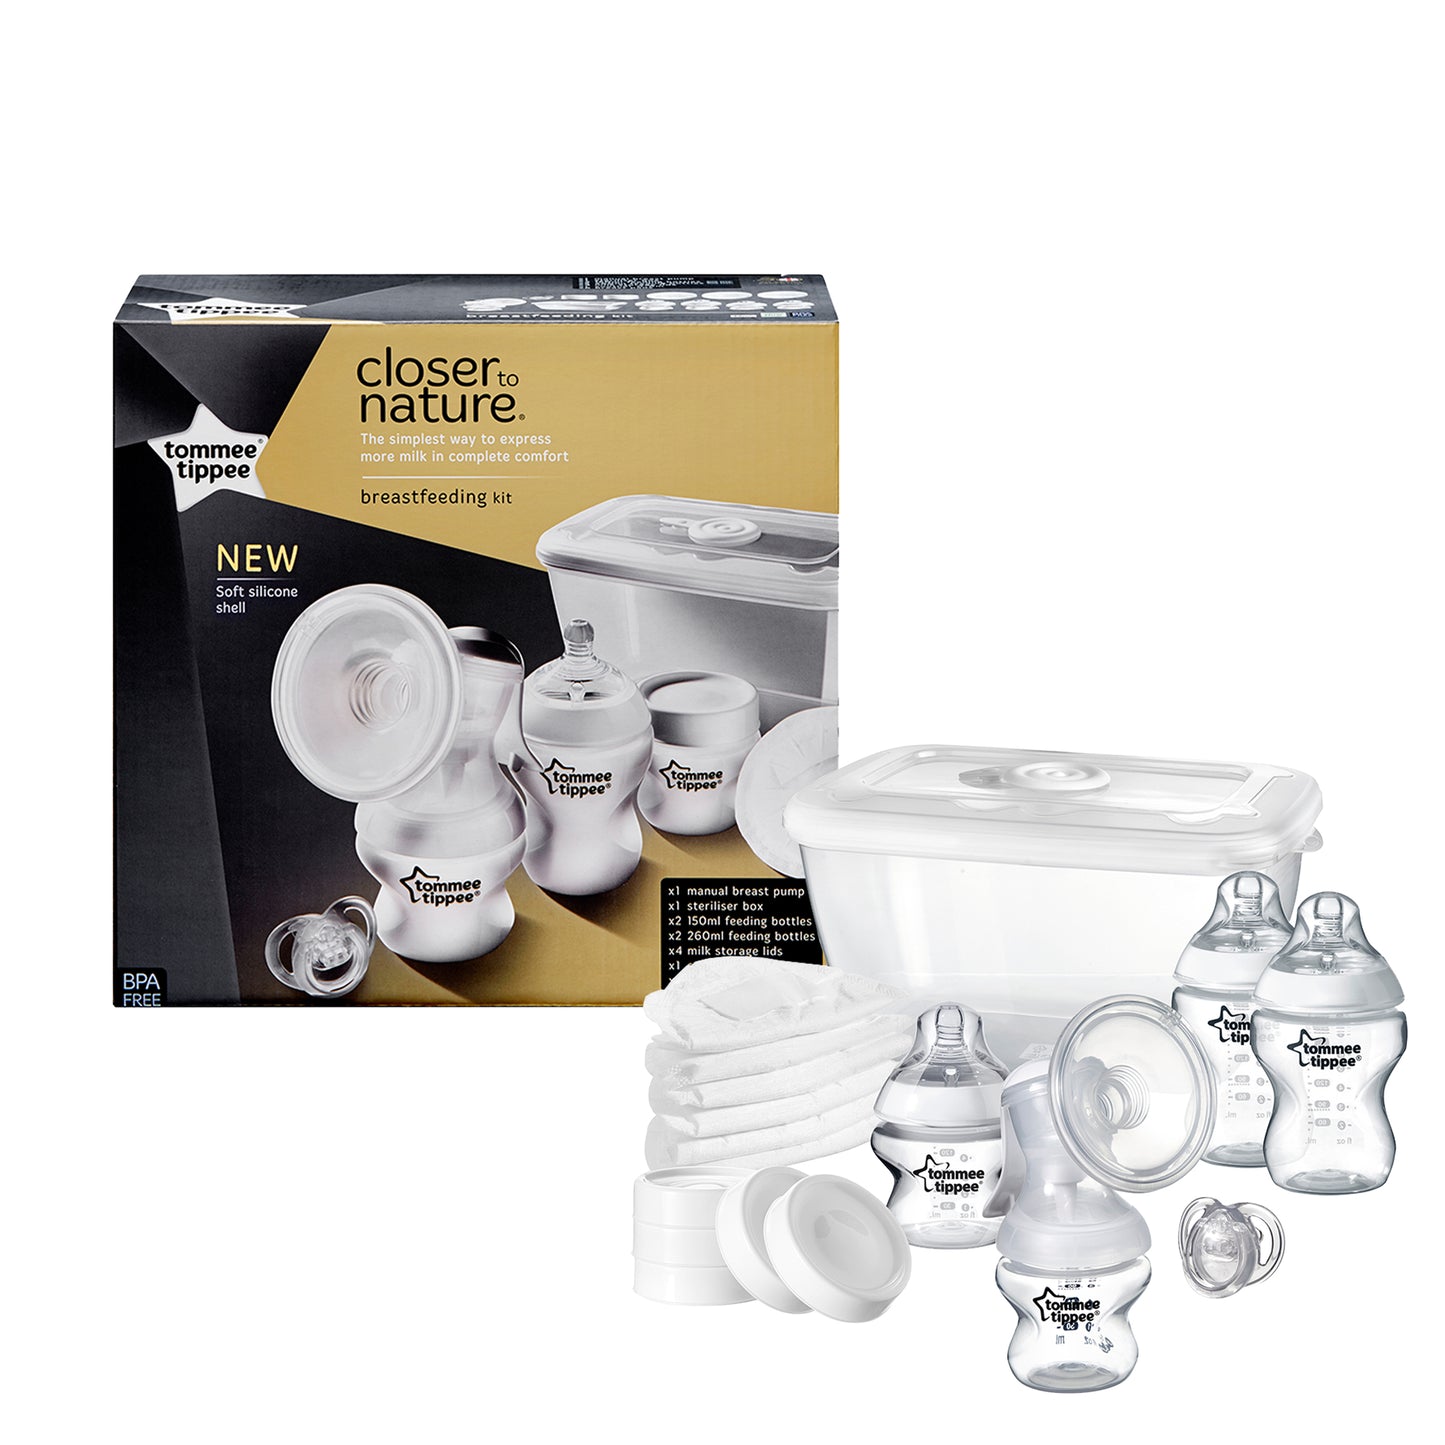 Tommee Tippee Closer to Nature breastfeeding starter set